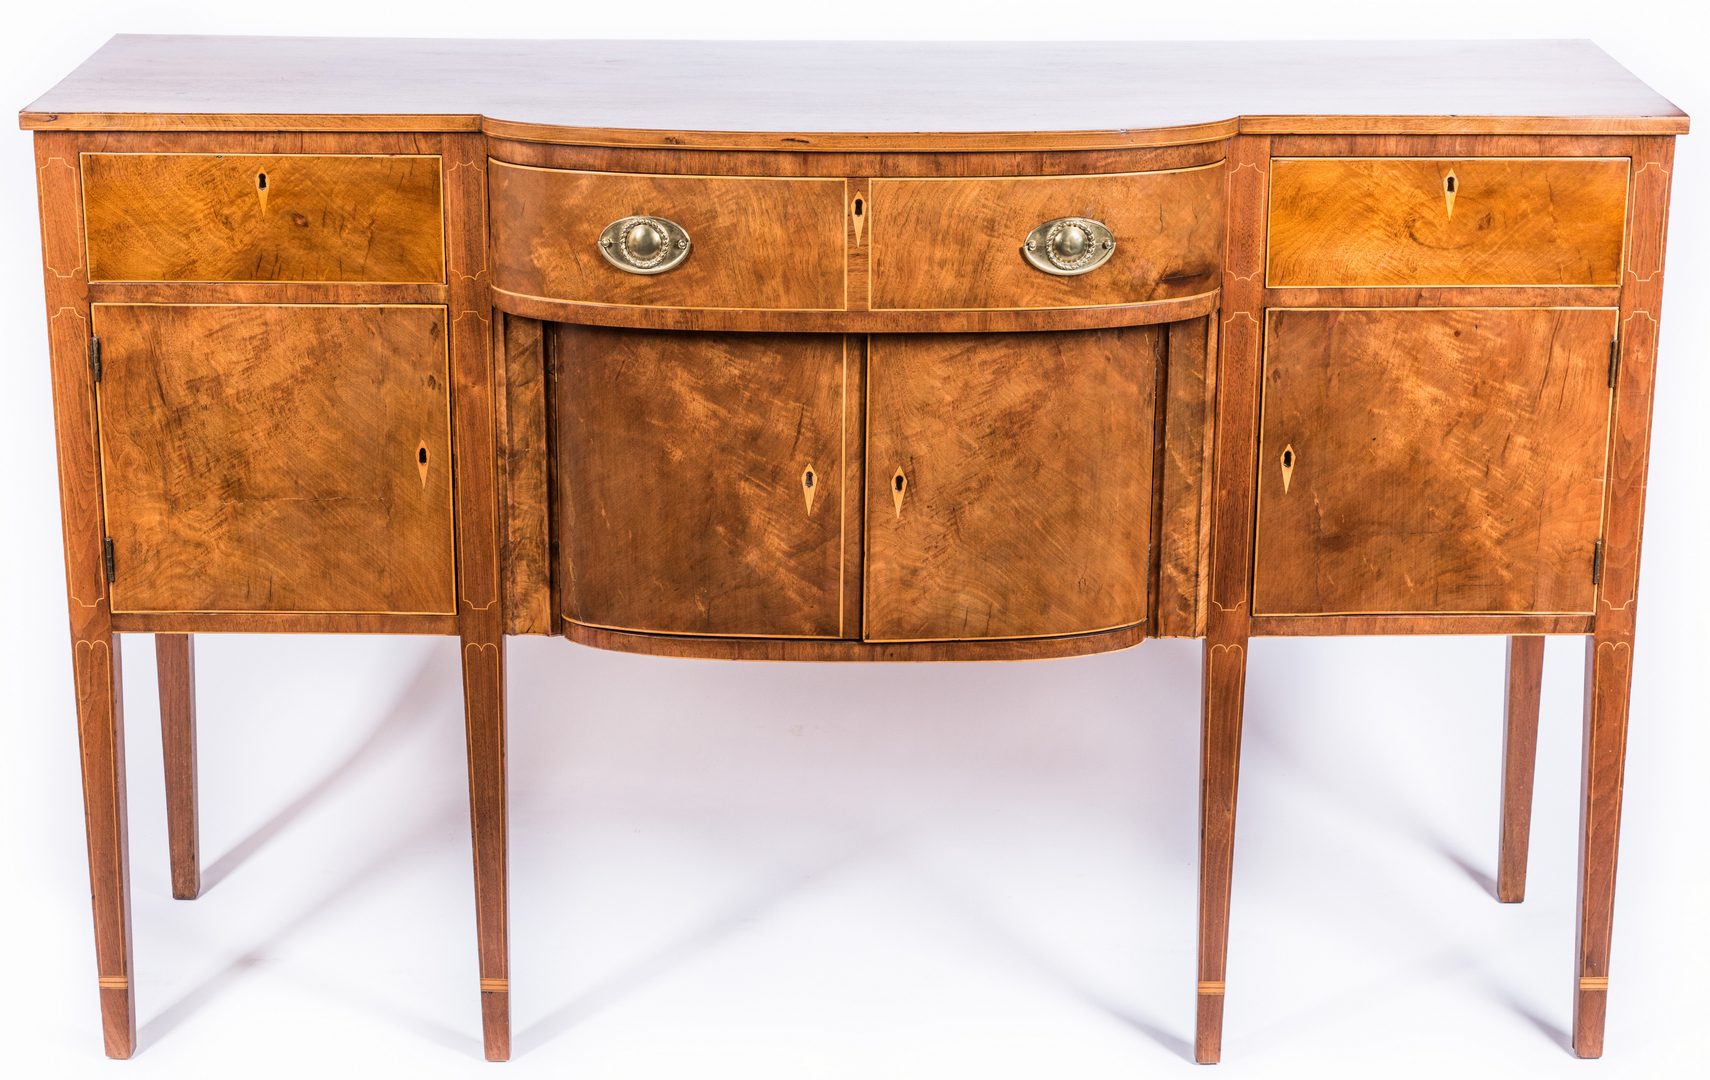 Lot 112: Virginia Federal Inlaid Sideboard, Signed by Maker